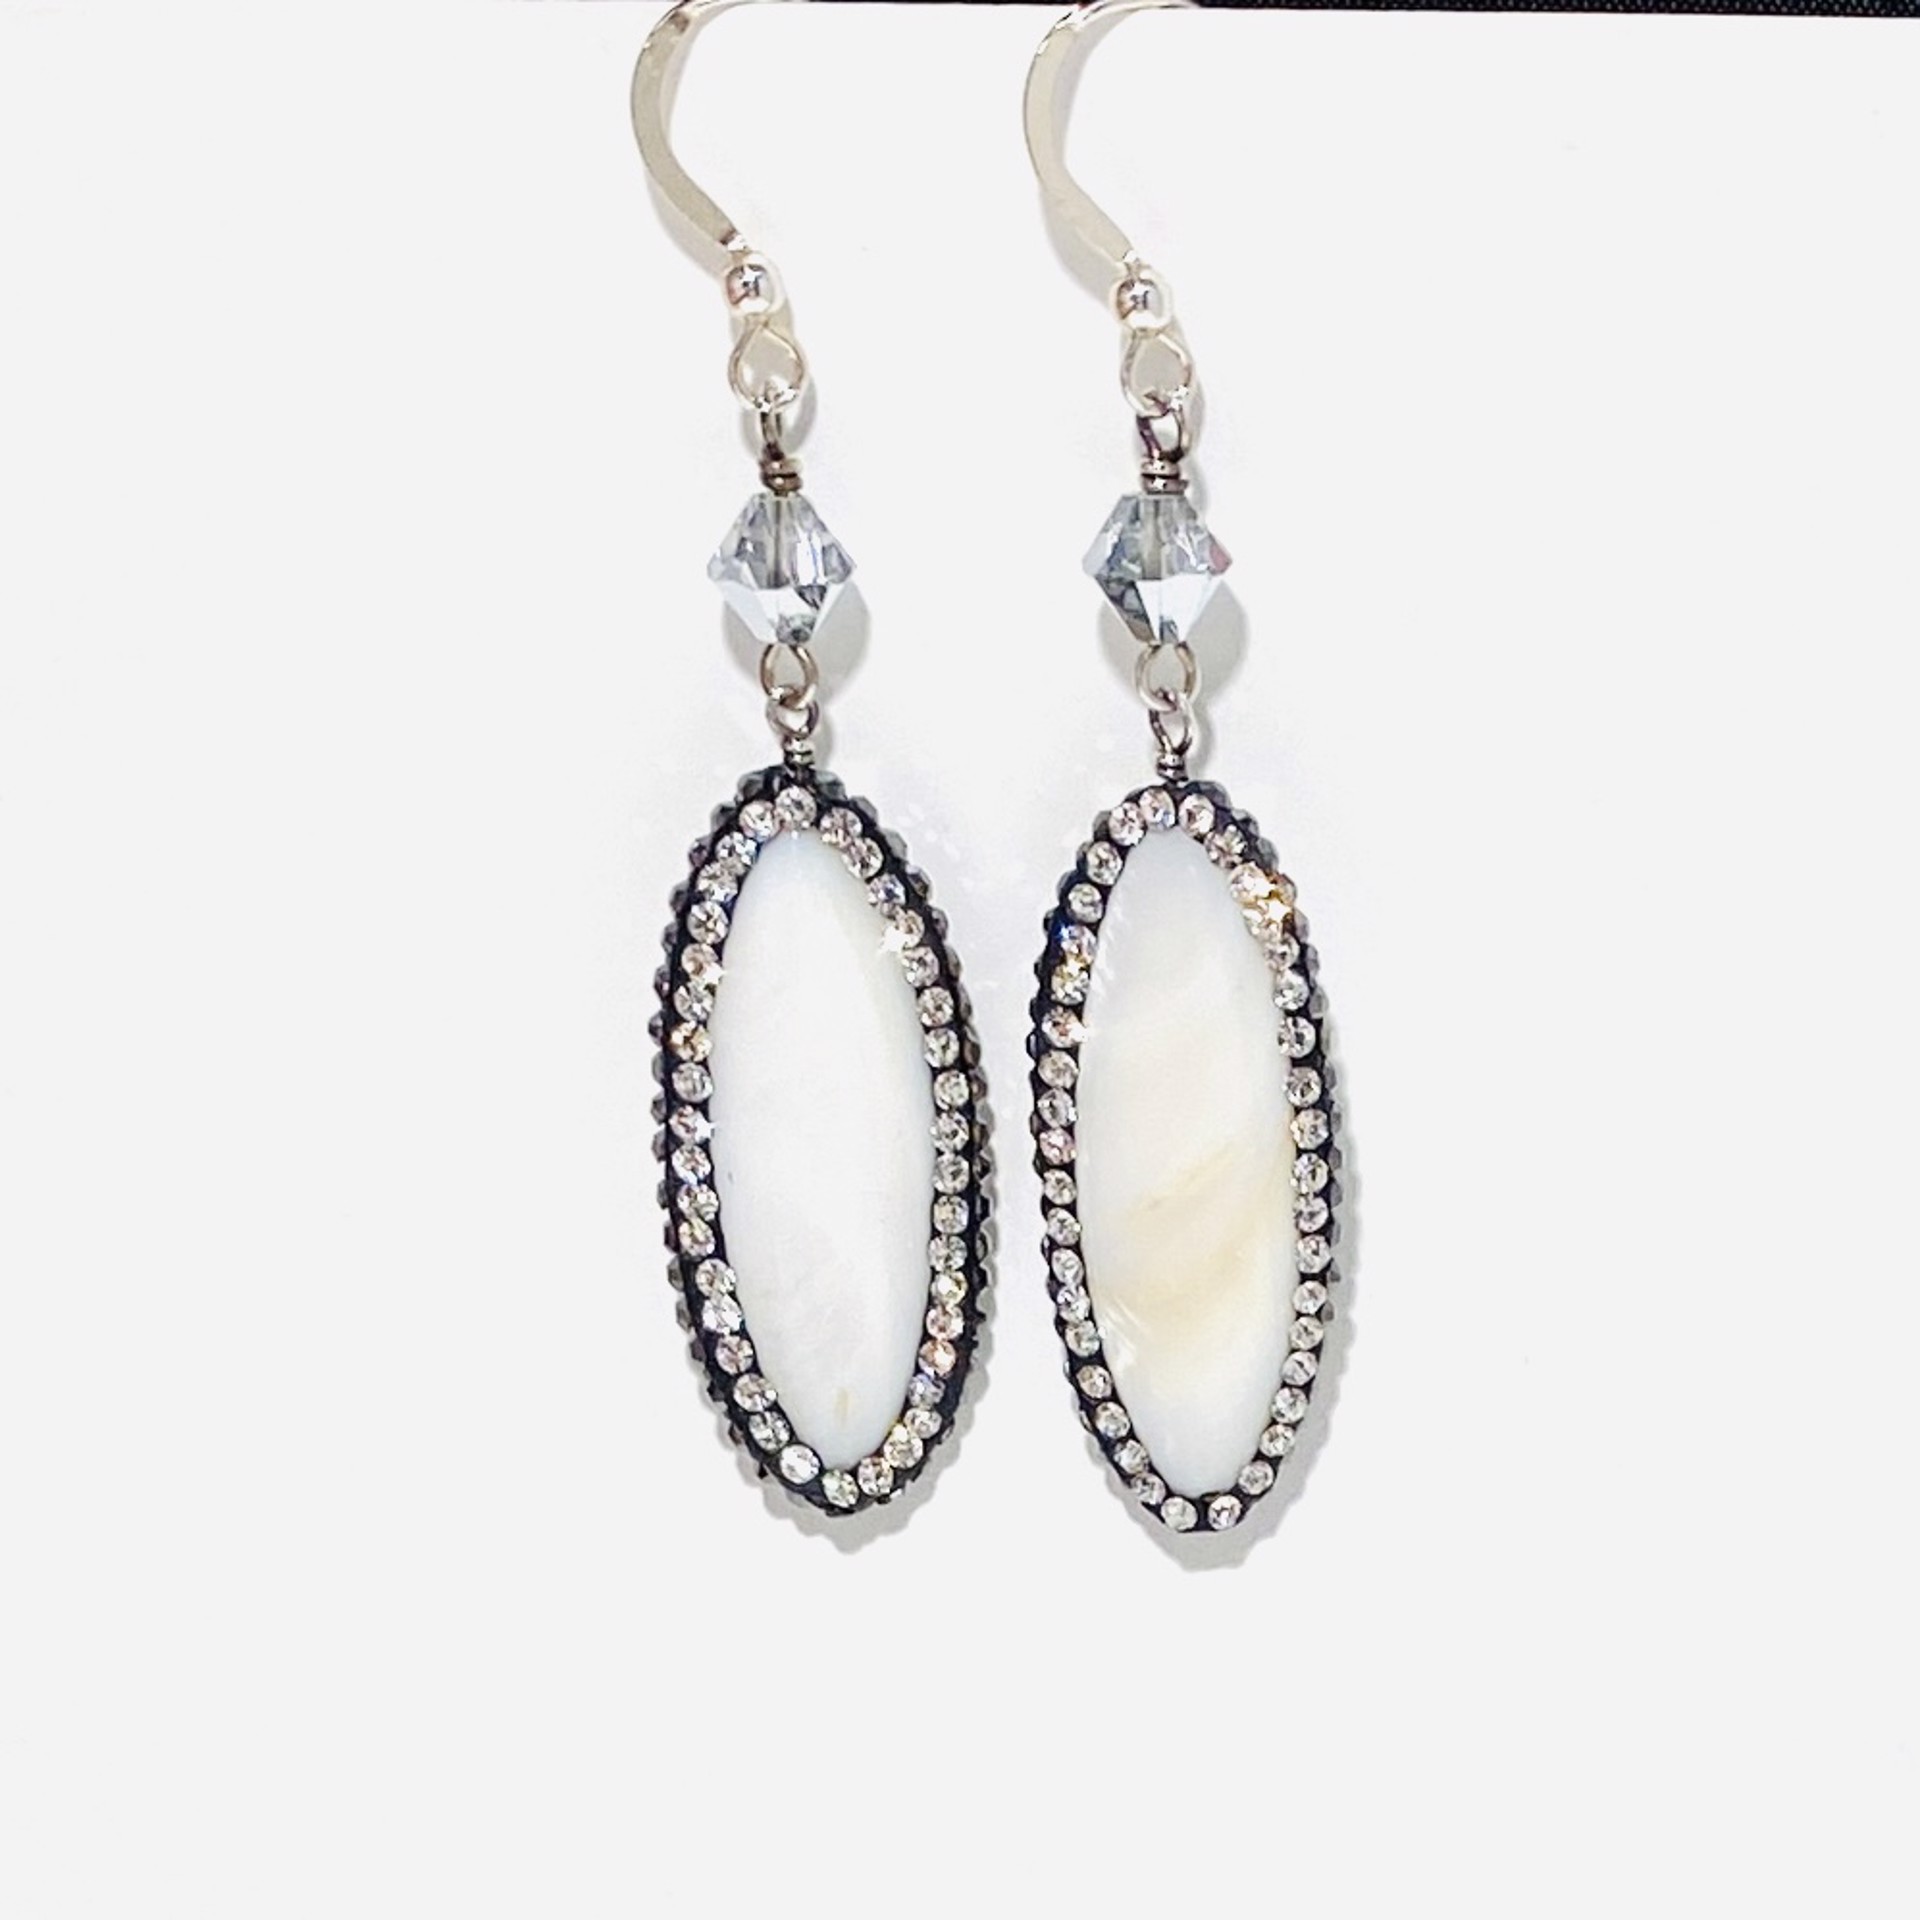 Pavé Crystal Framed Mother of Pearl Earrings LR23-24 by Legare Riano